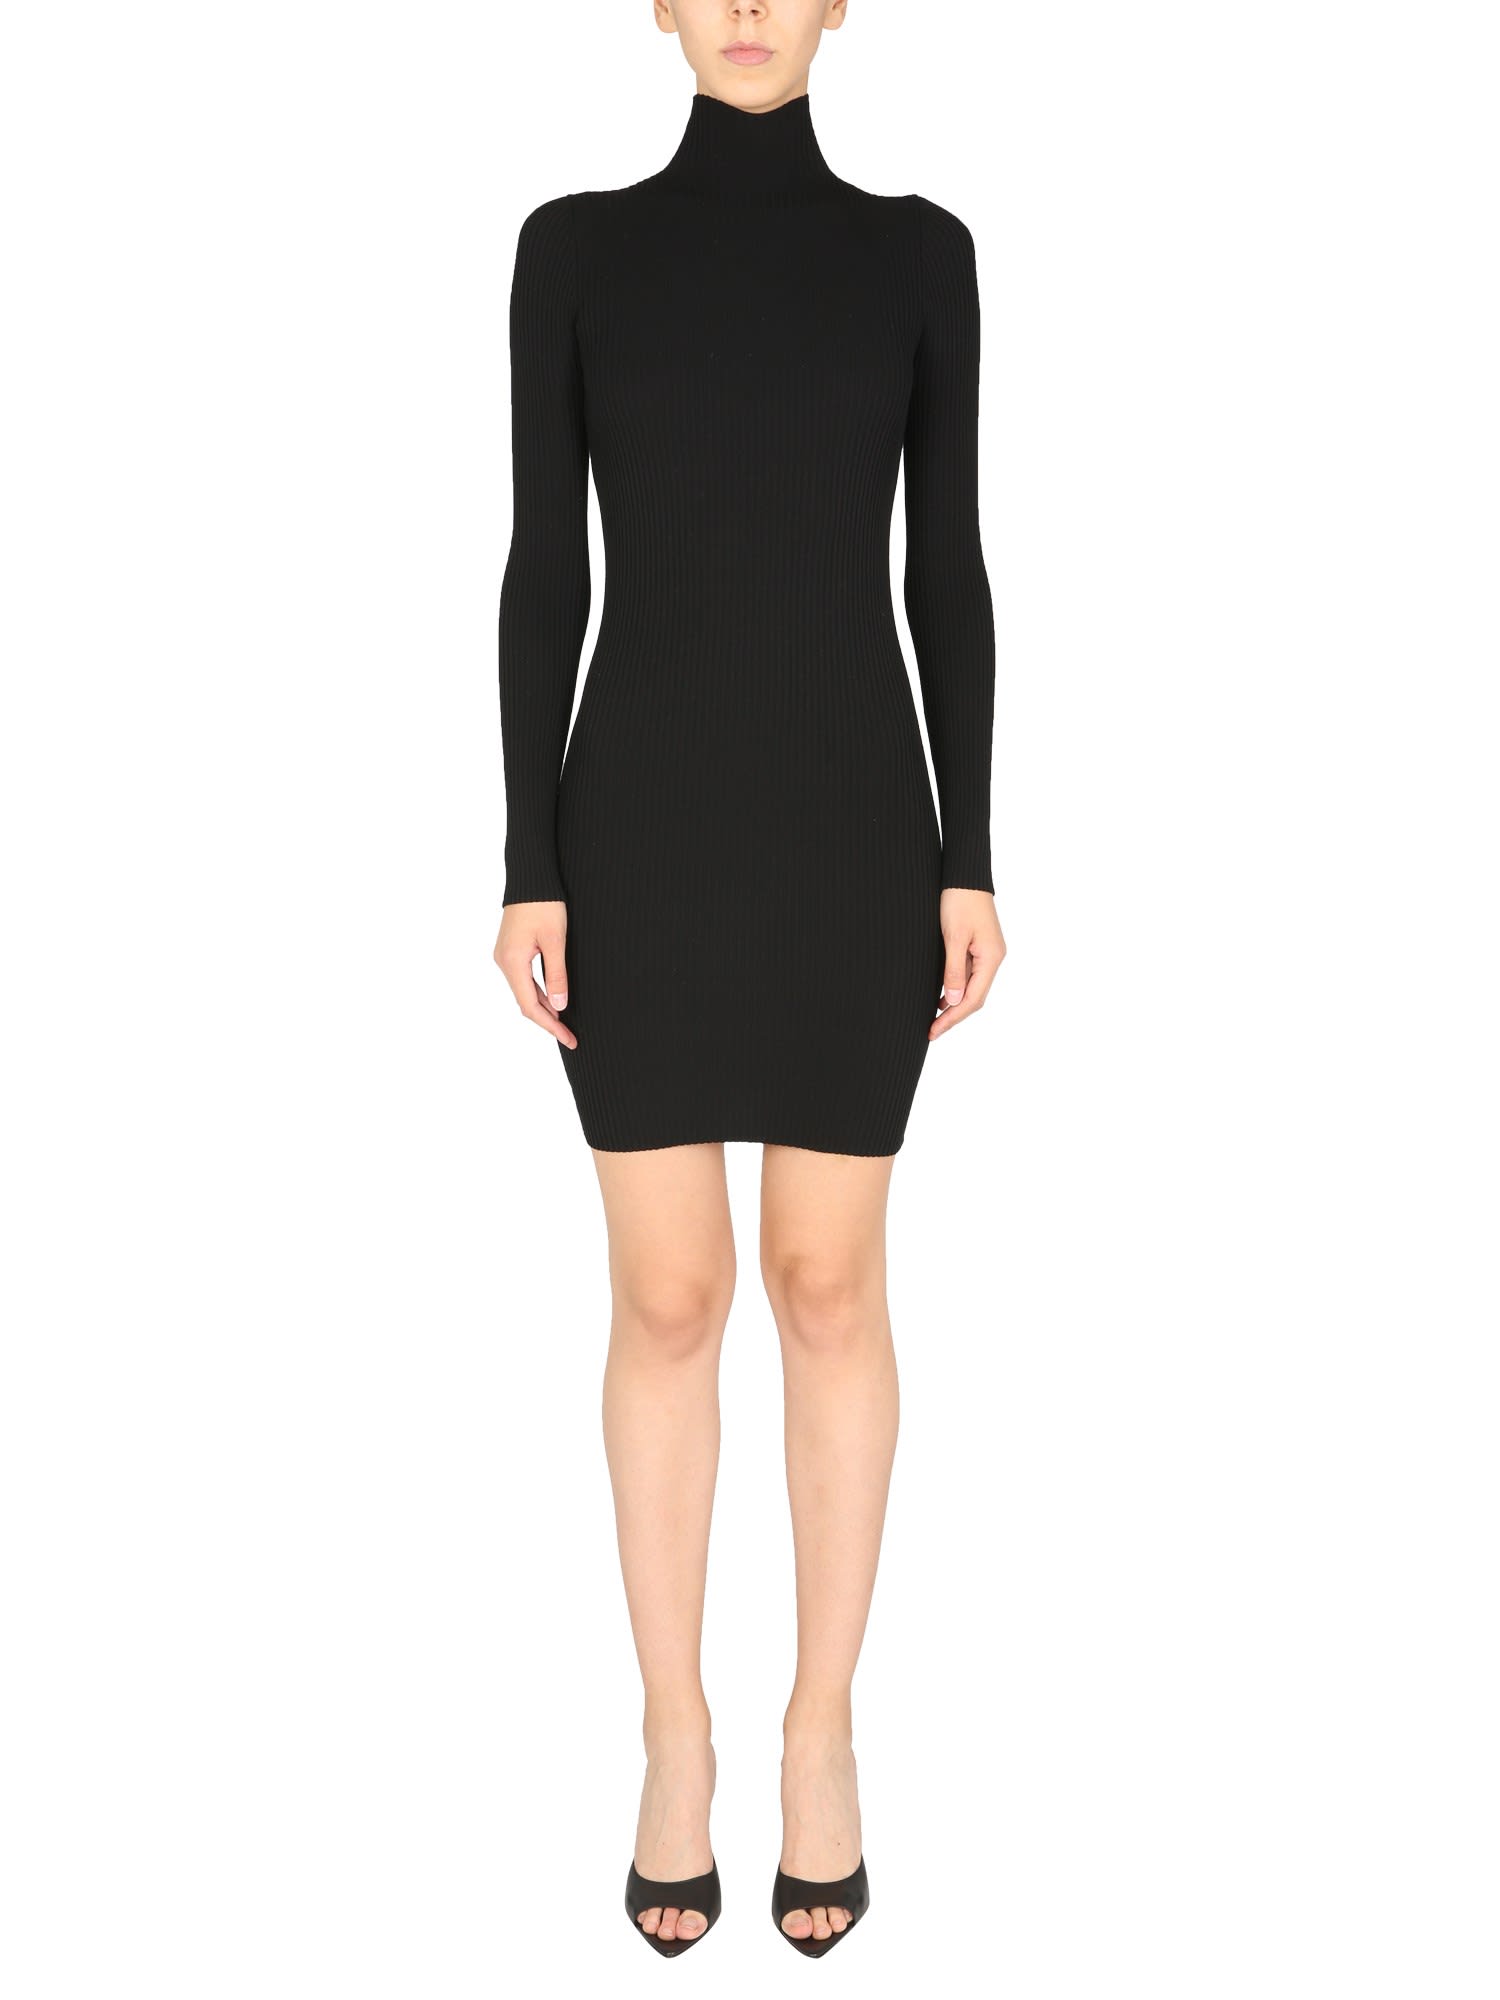 Wolford High Neck Dress